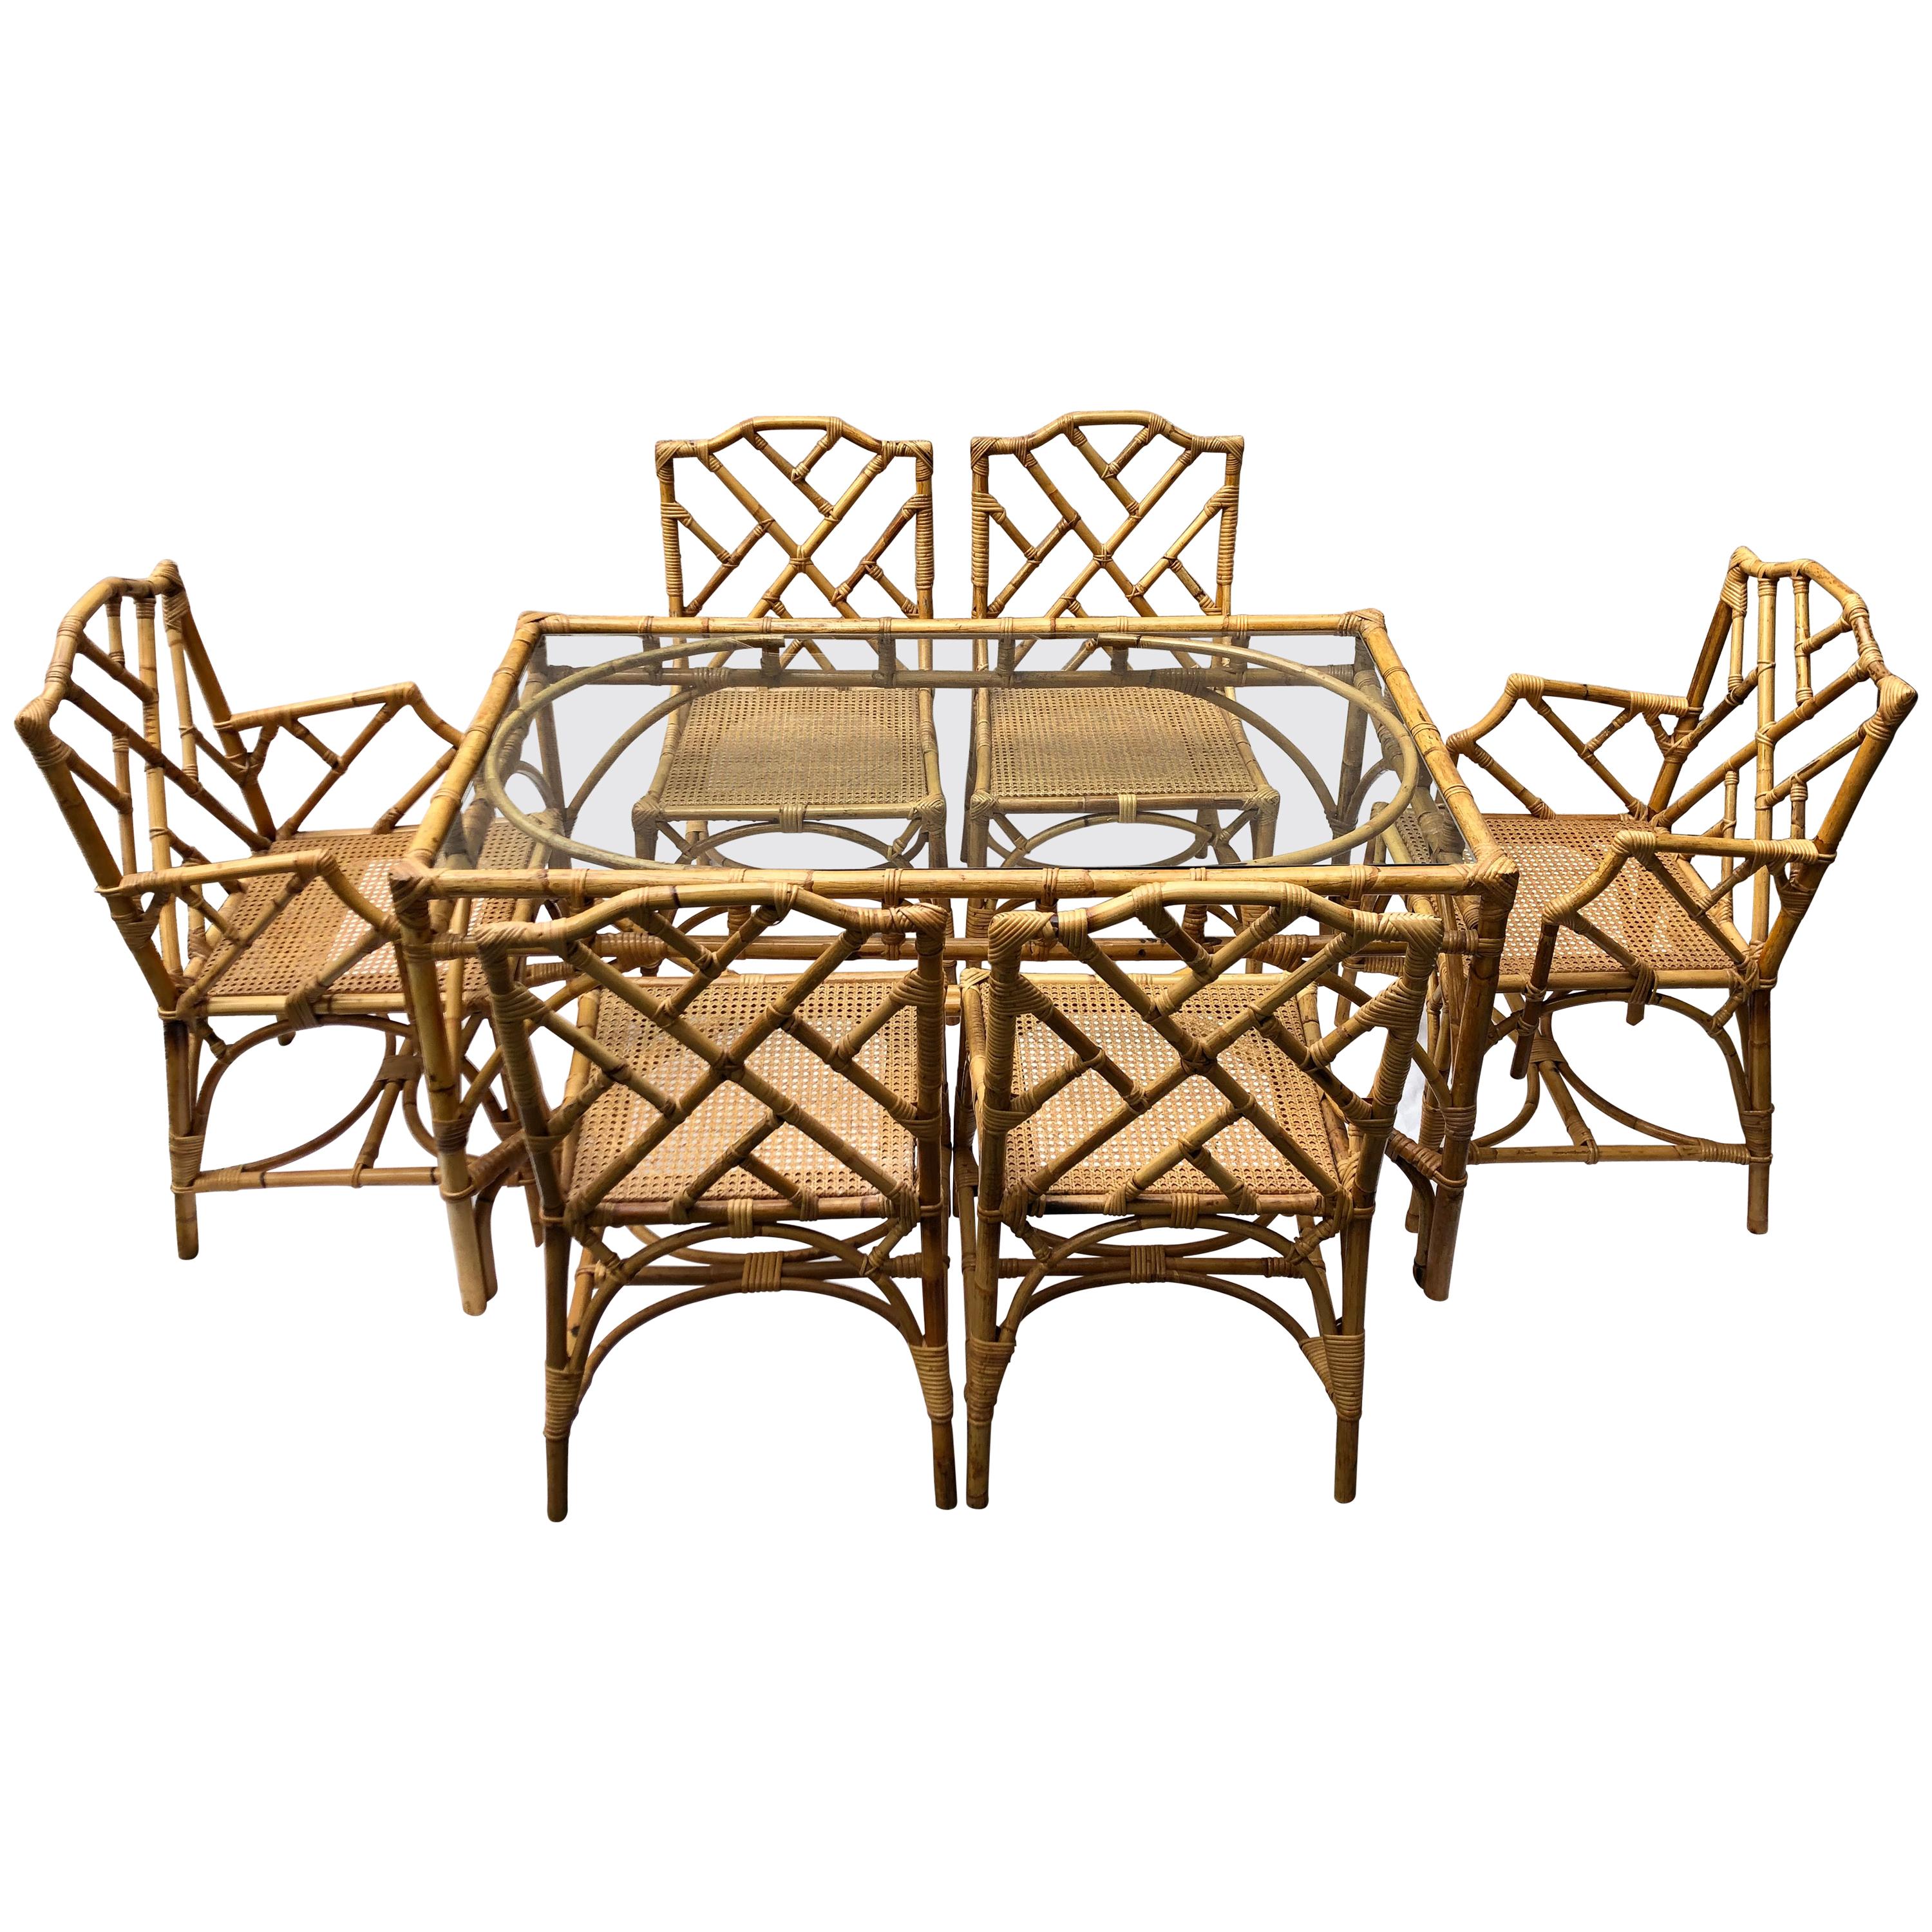 Italian Rattan and Cane Dining Set by Dal Vera